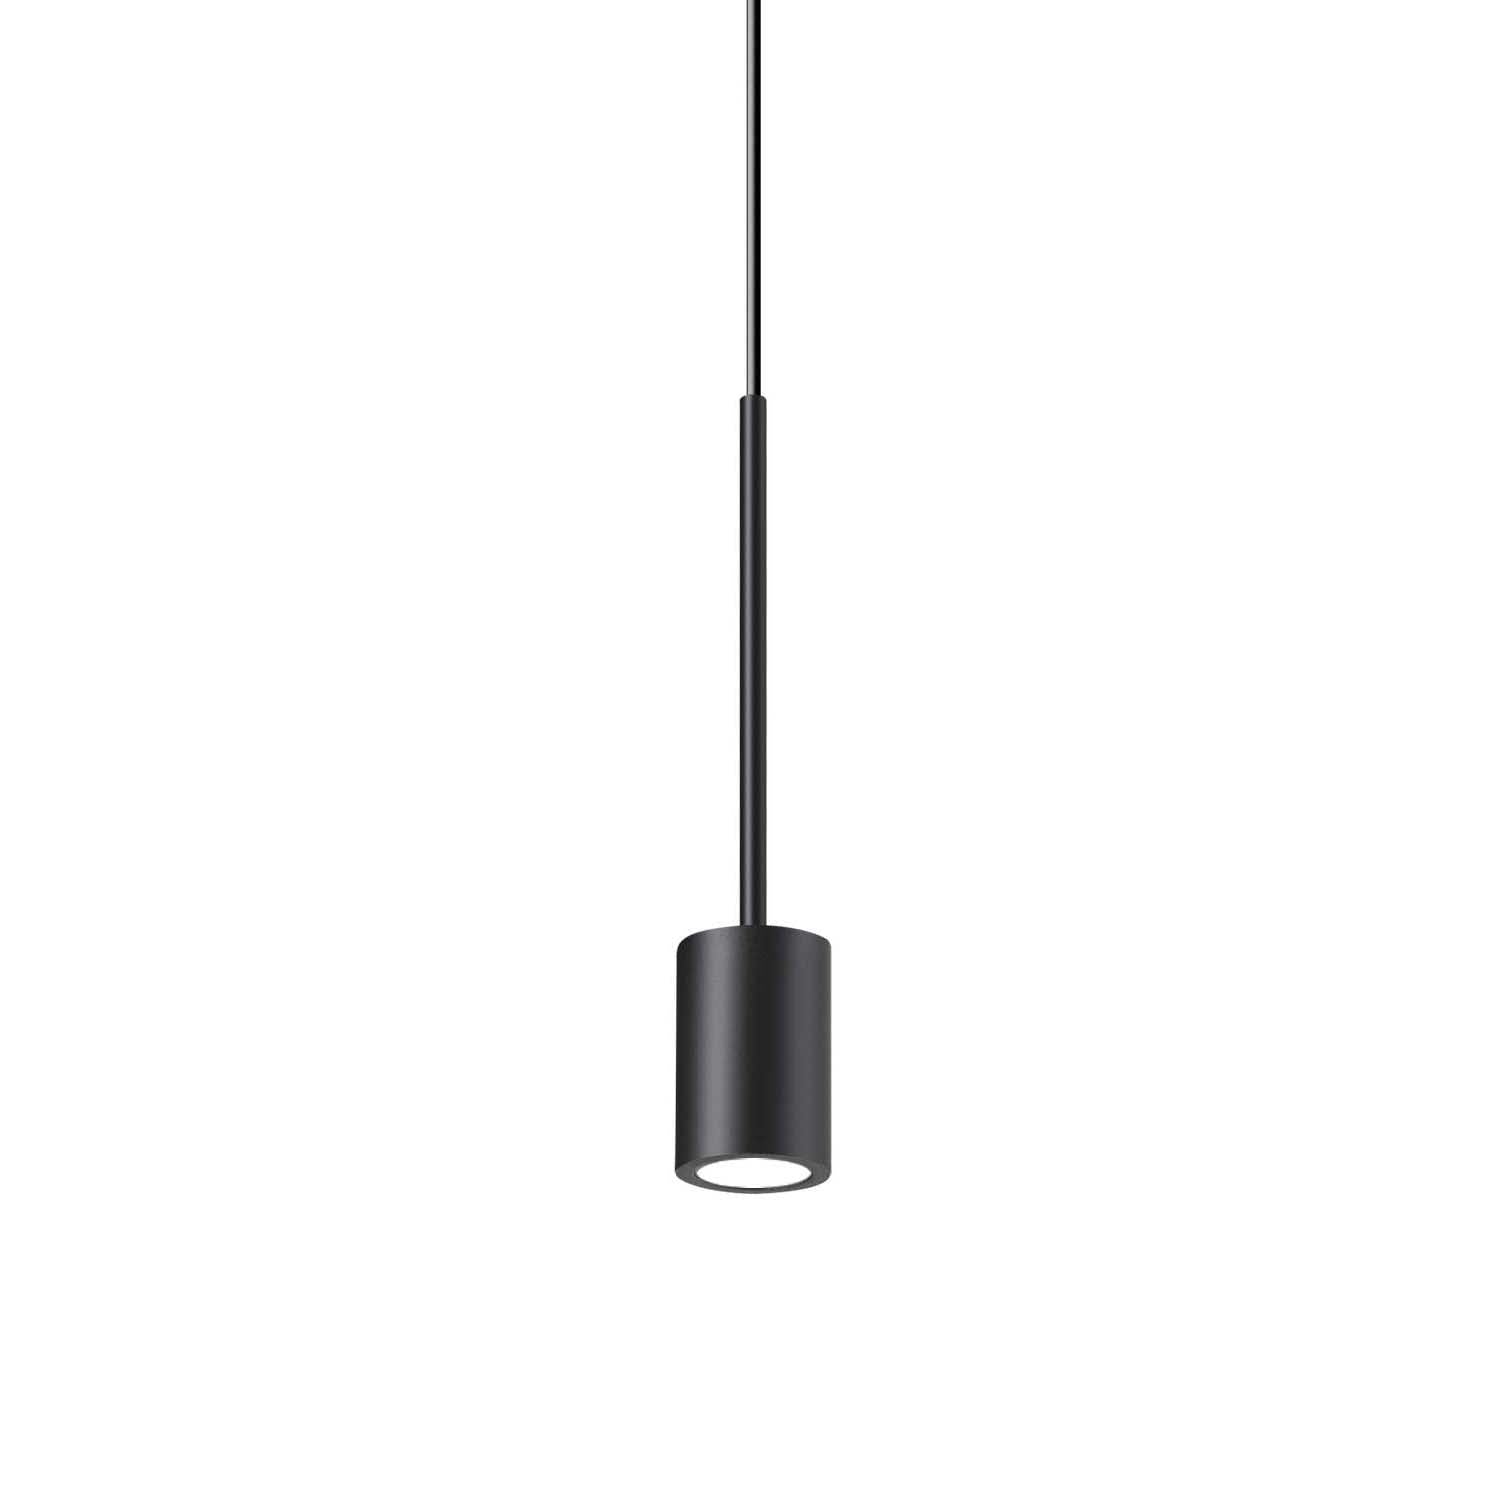 ARCHIMEDE - Small modern spot pendant light, different shapes